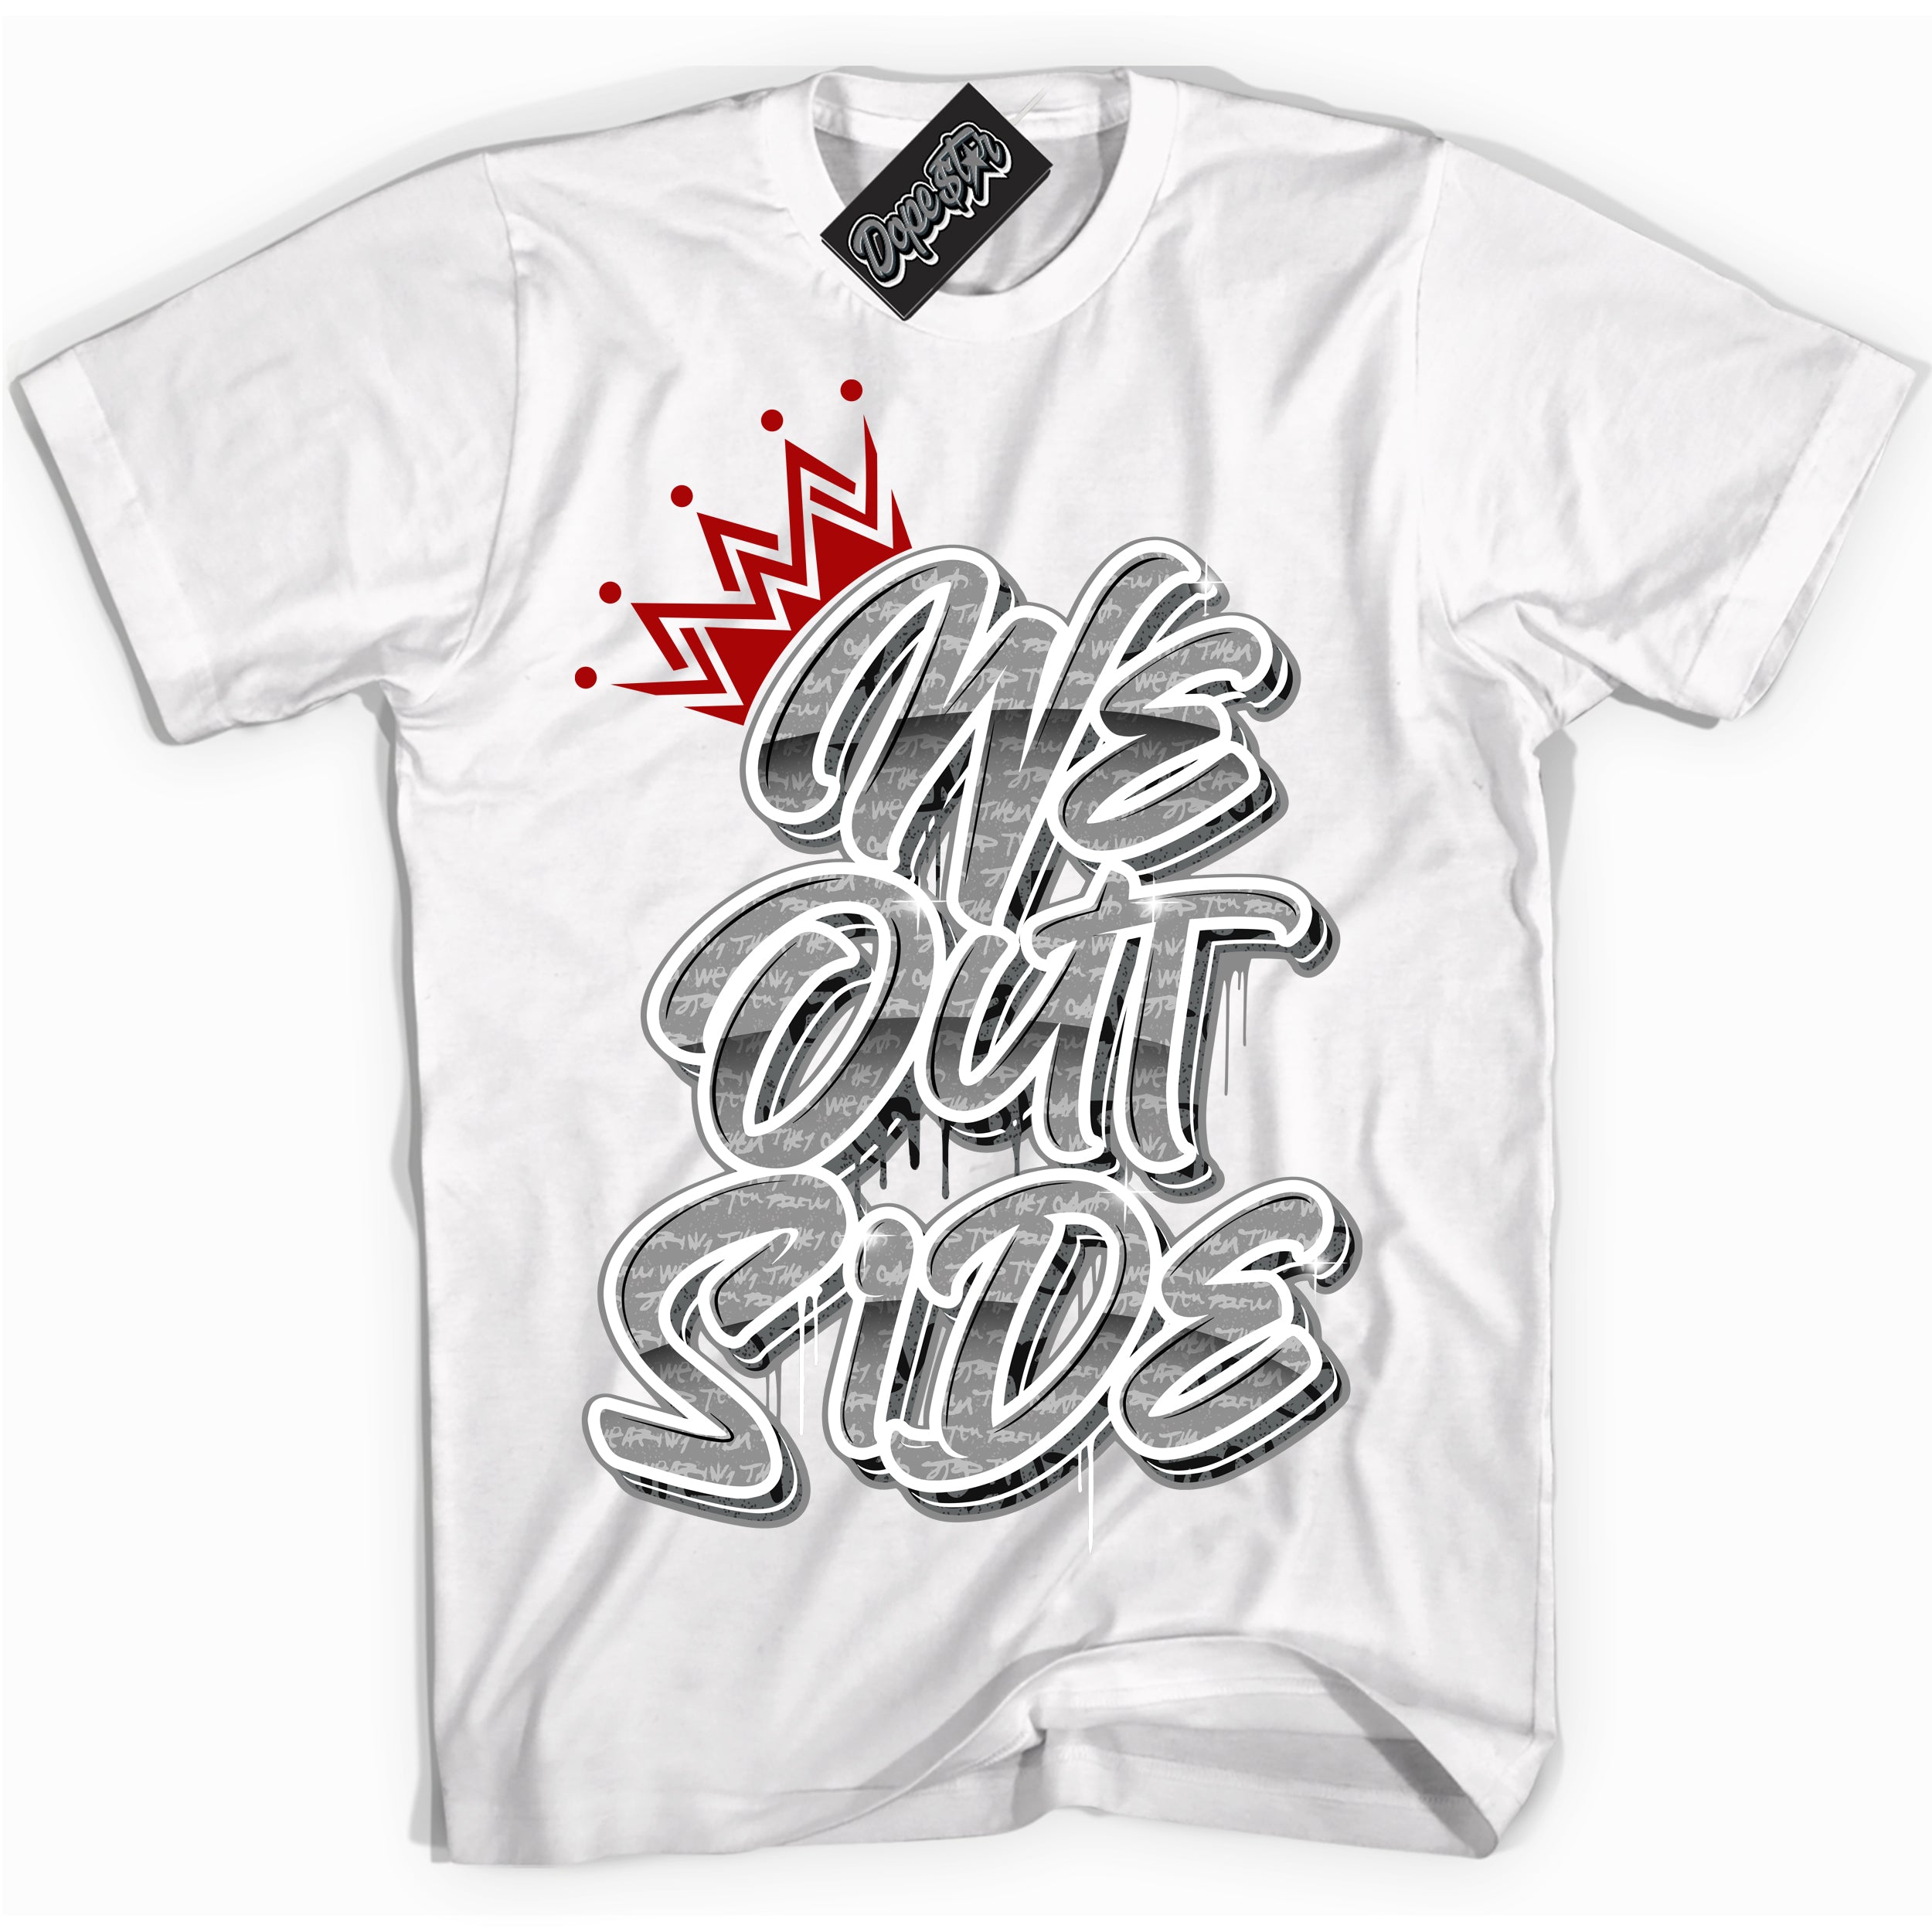 Cool White Shirt with “ We Outside ” design that perfectly matches Rebellionaire 1s Sneakers.